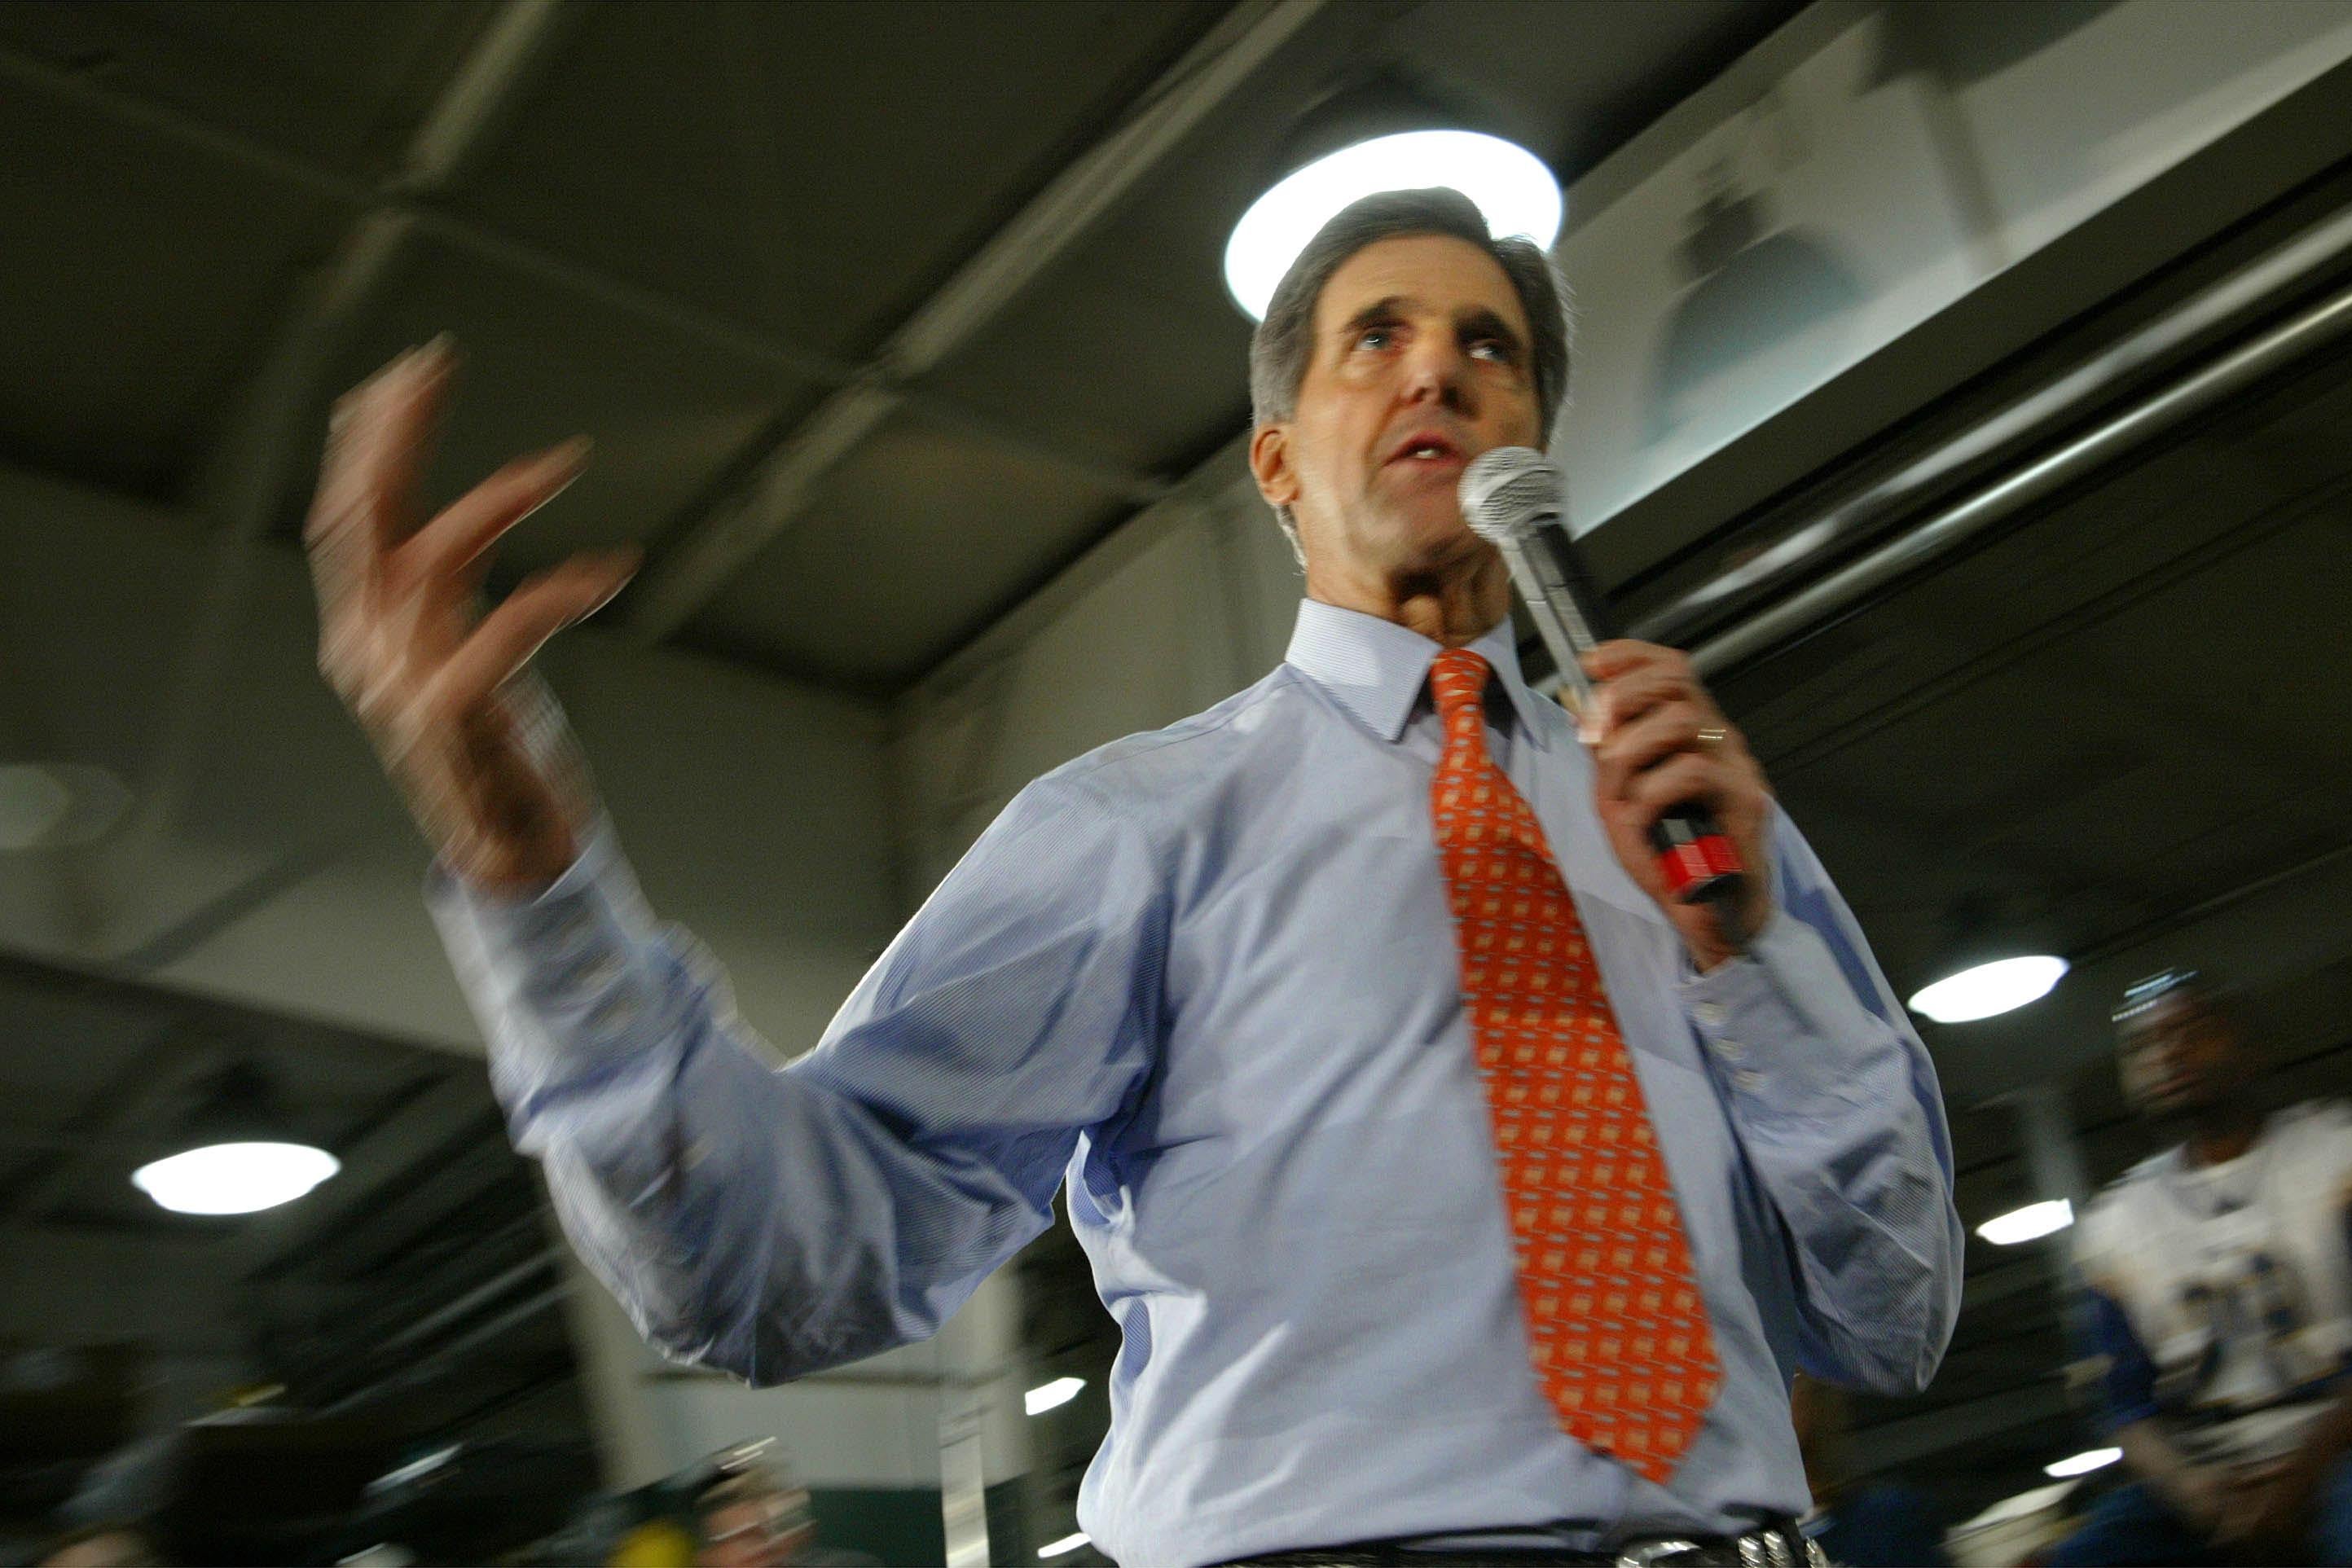 John Kerry, viewed from below, gestures while holding a microphone.